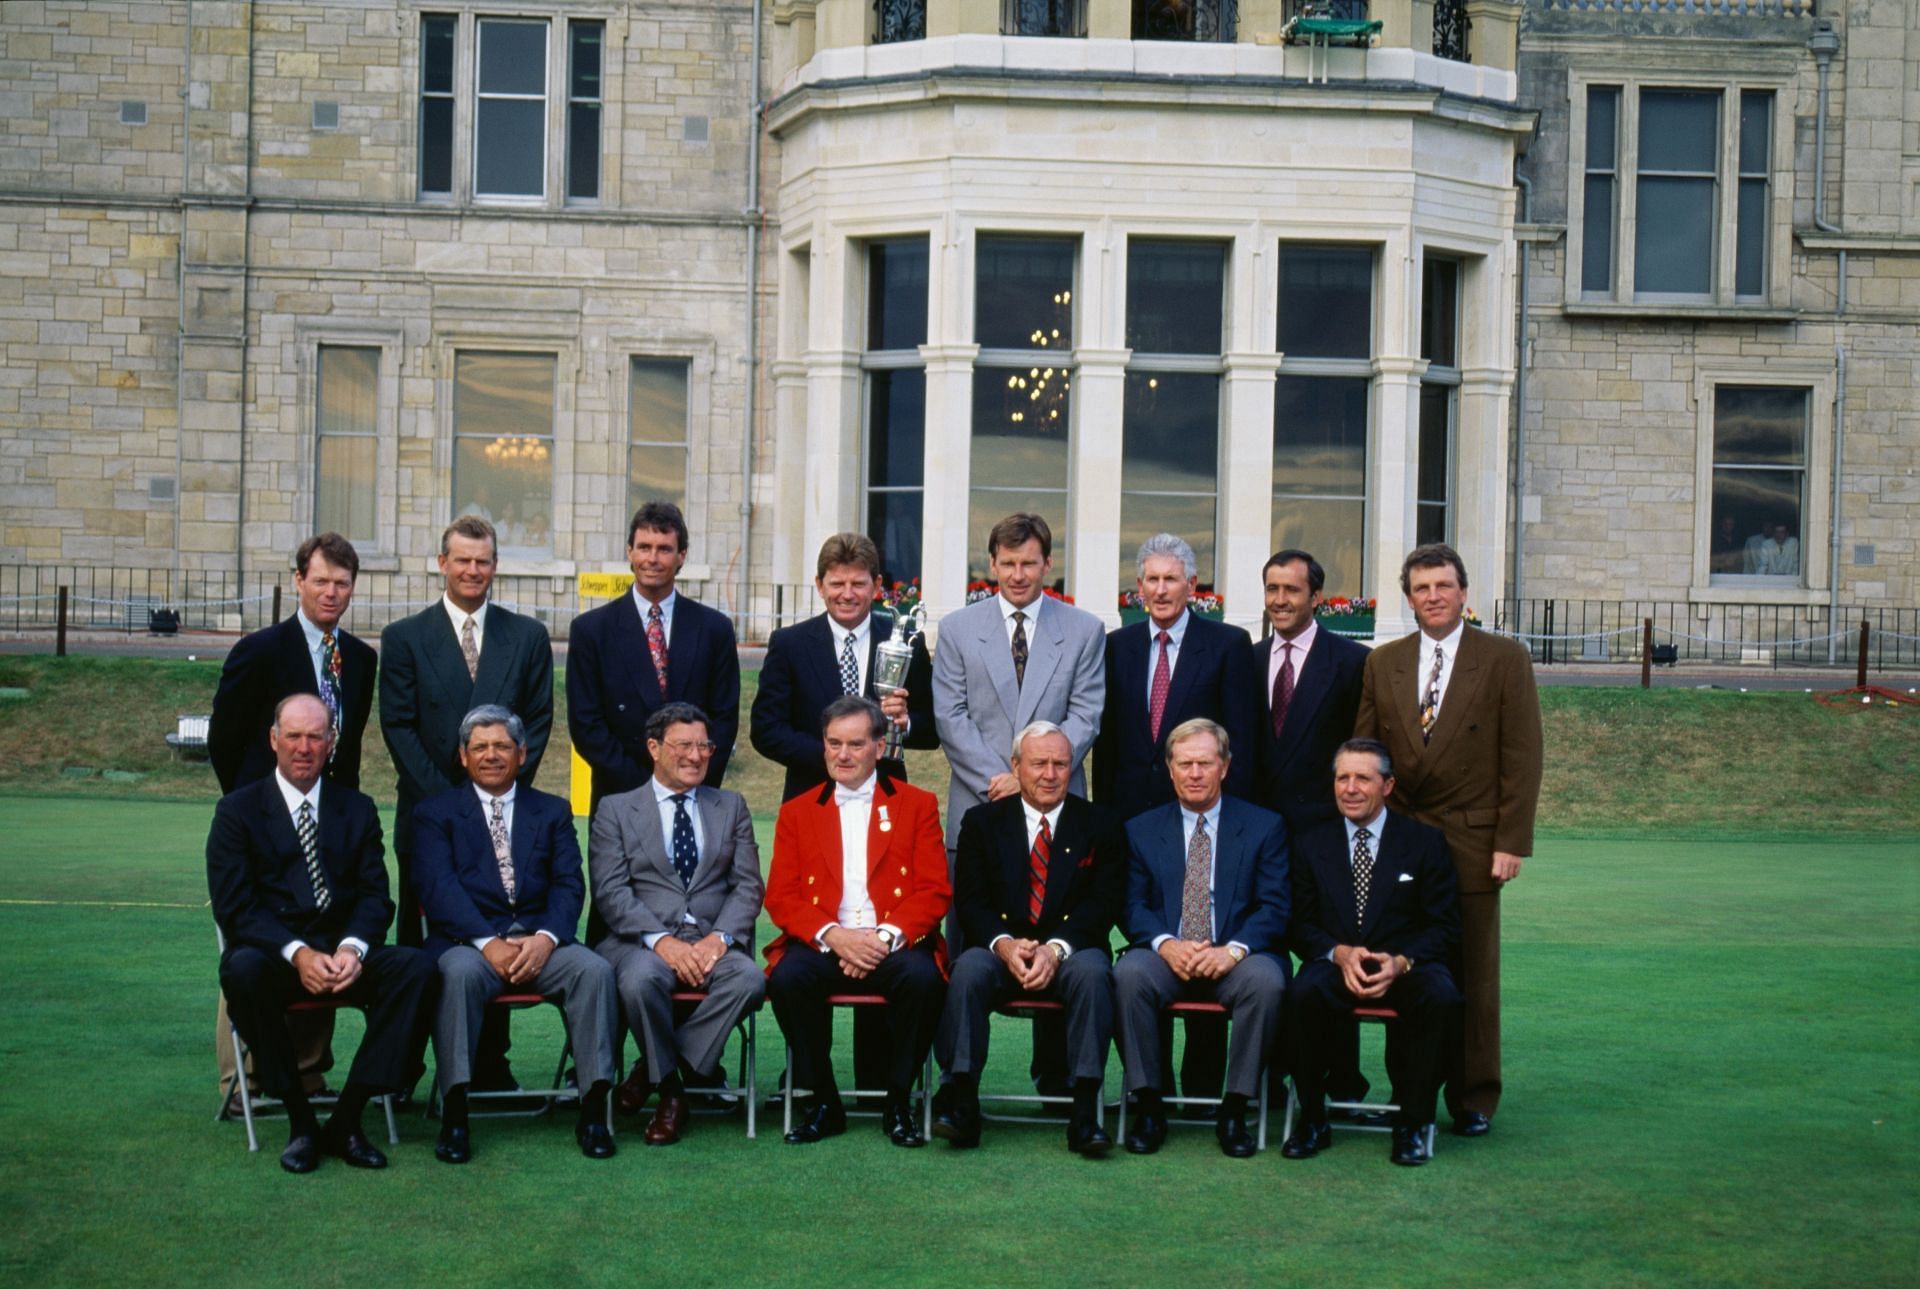 British Open 1995 at the Old Course at St. Andrews, Scotland (Image via Getty)